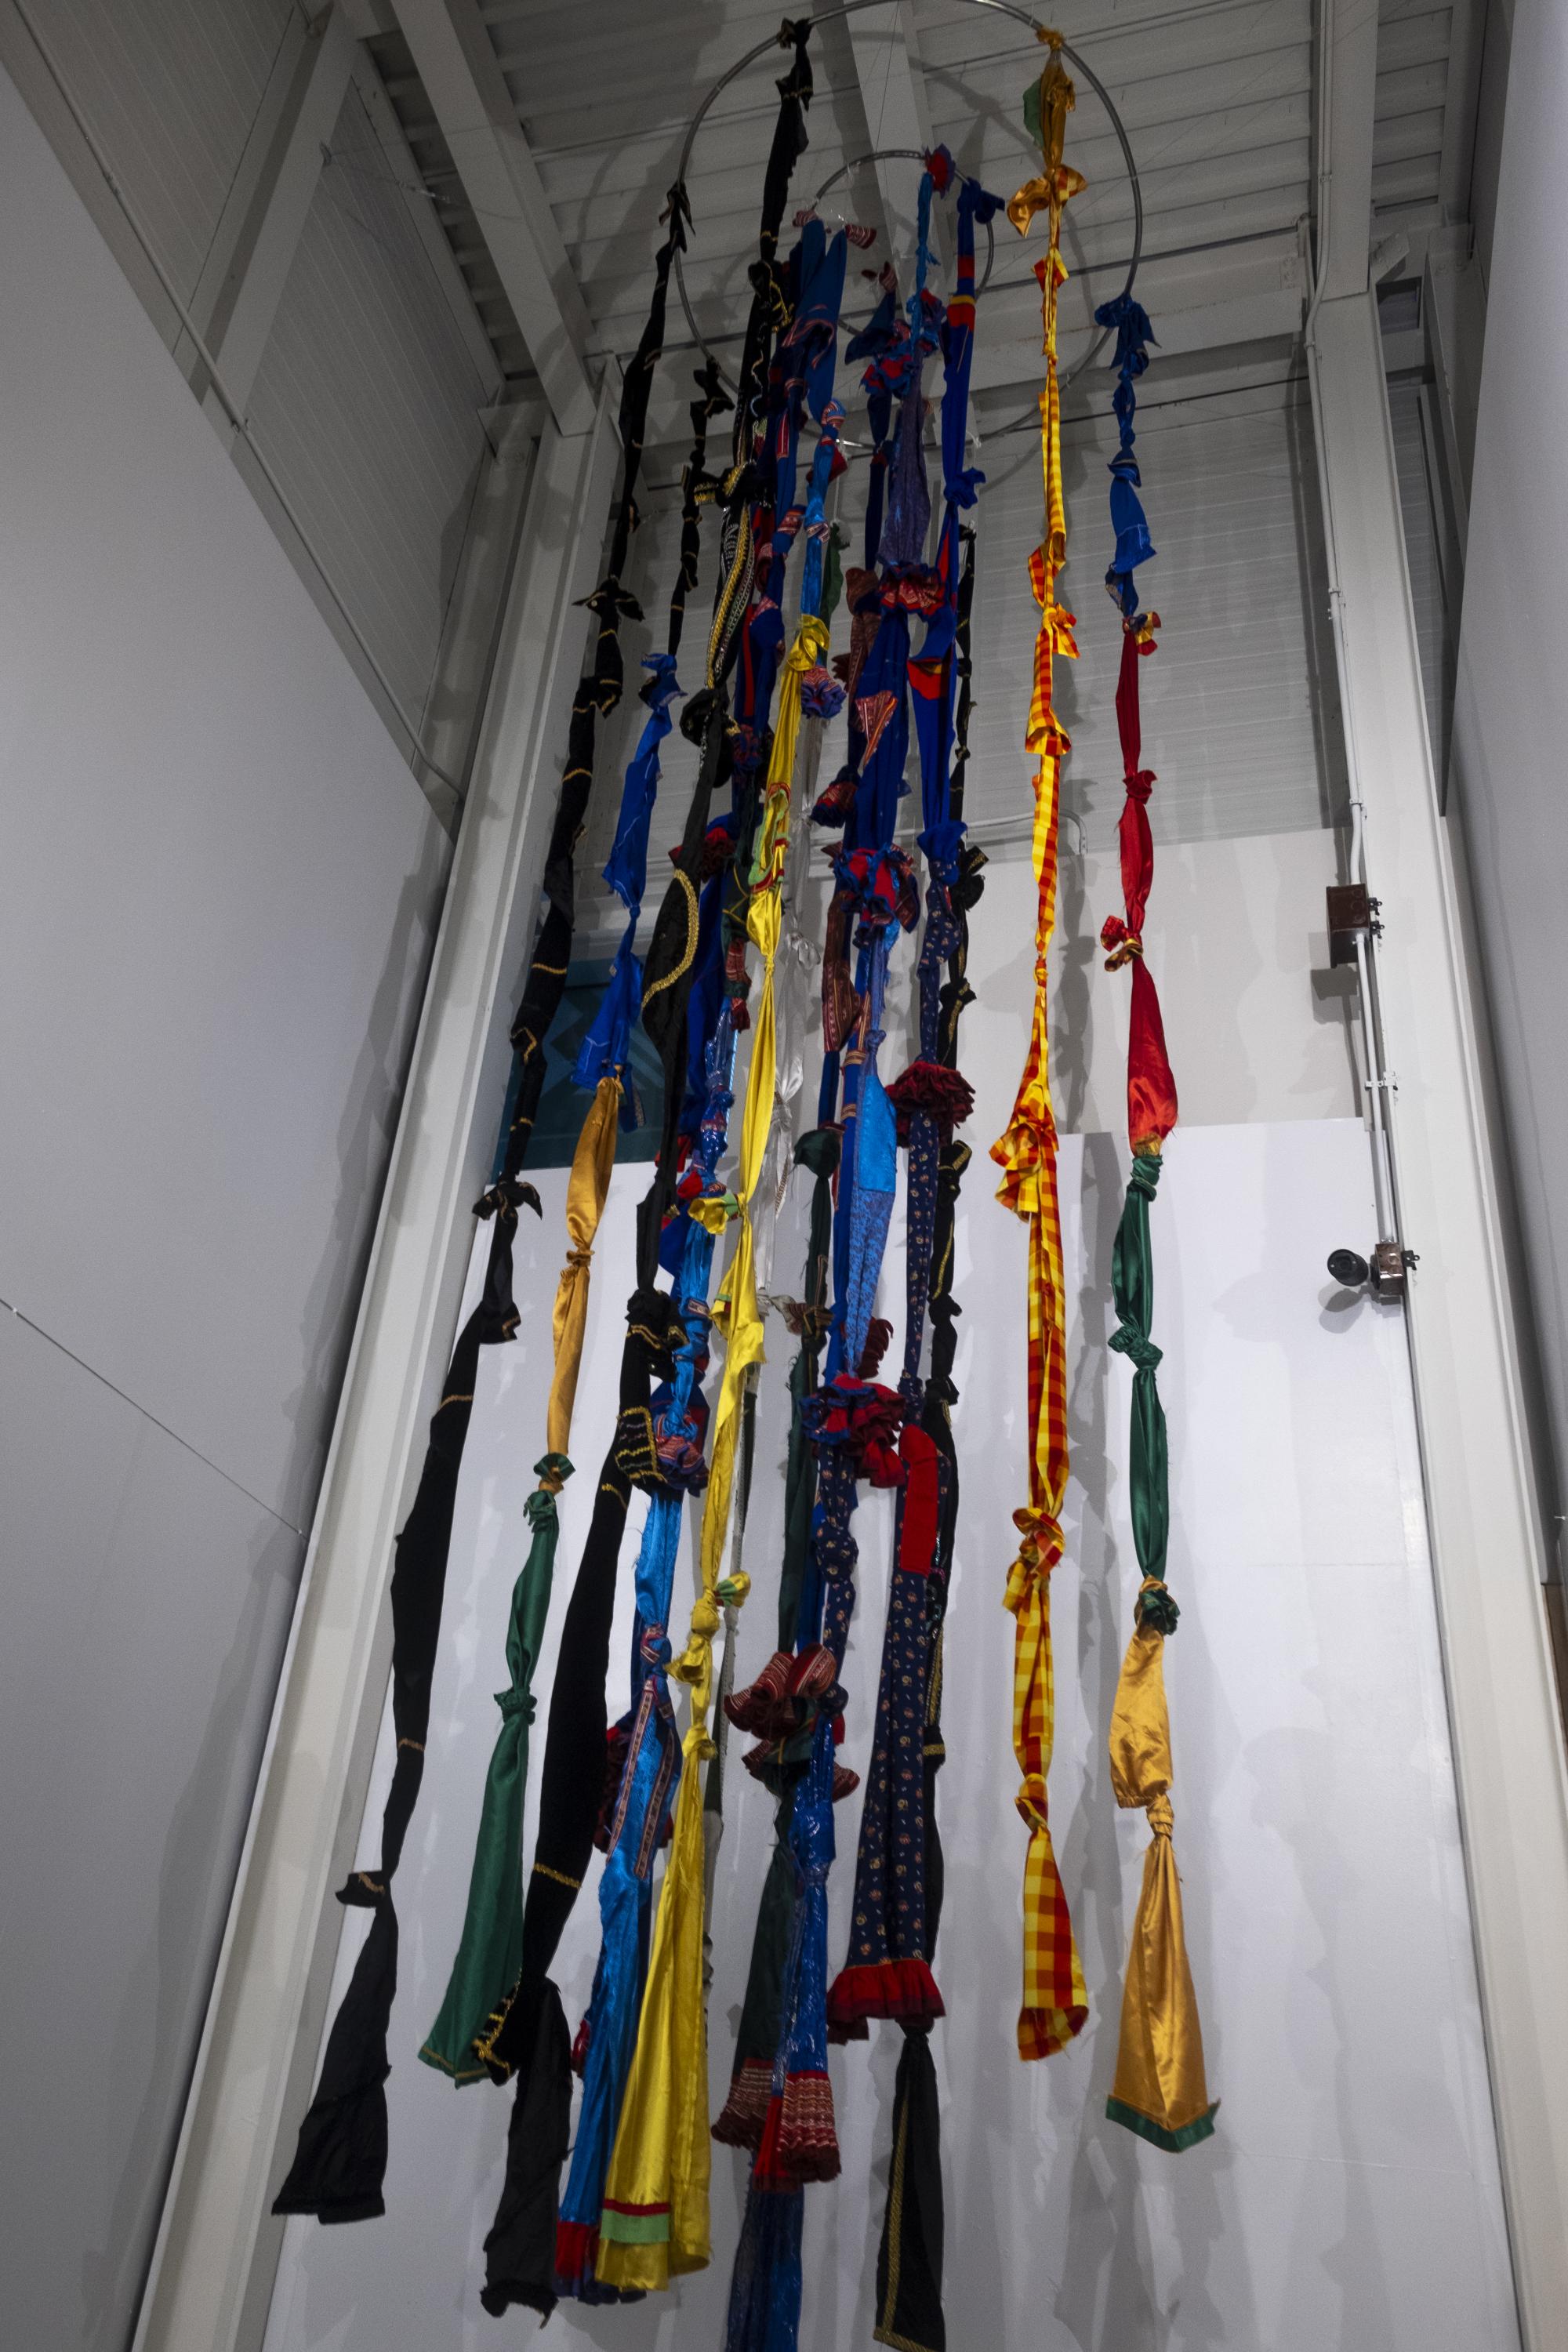 [ID: "A full length shot of the textile installation hanging from the ceiling from 2 metal hoops. Hanging from the hoops are long strips of colourful fabric tied with knots to form a quipo.”]